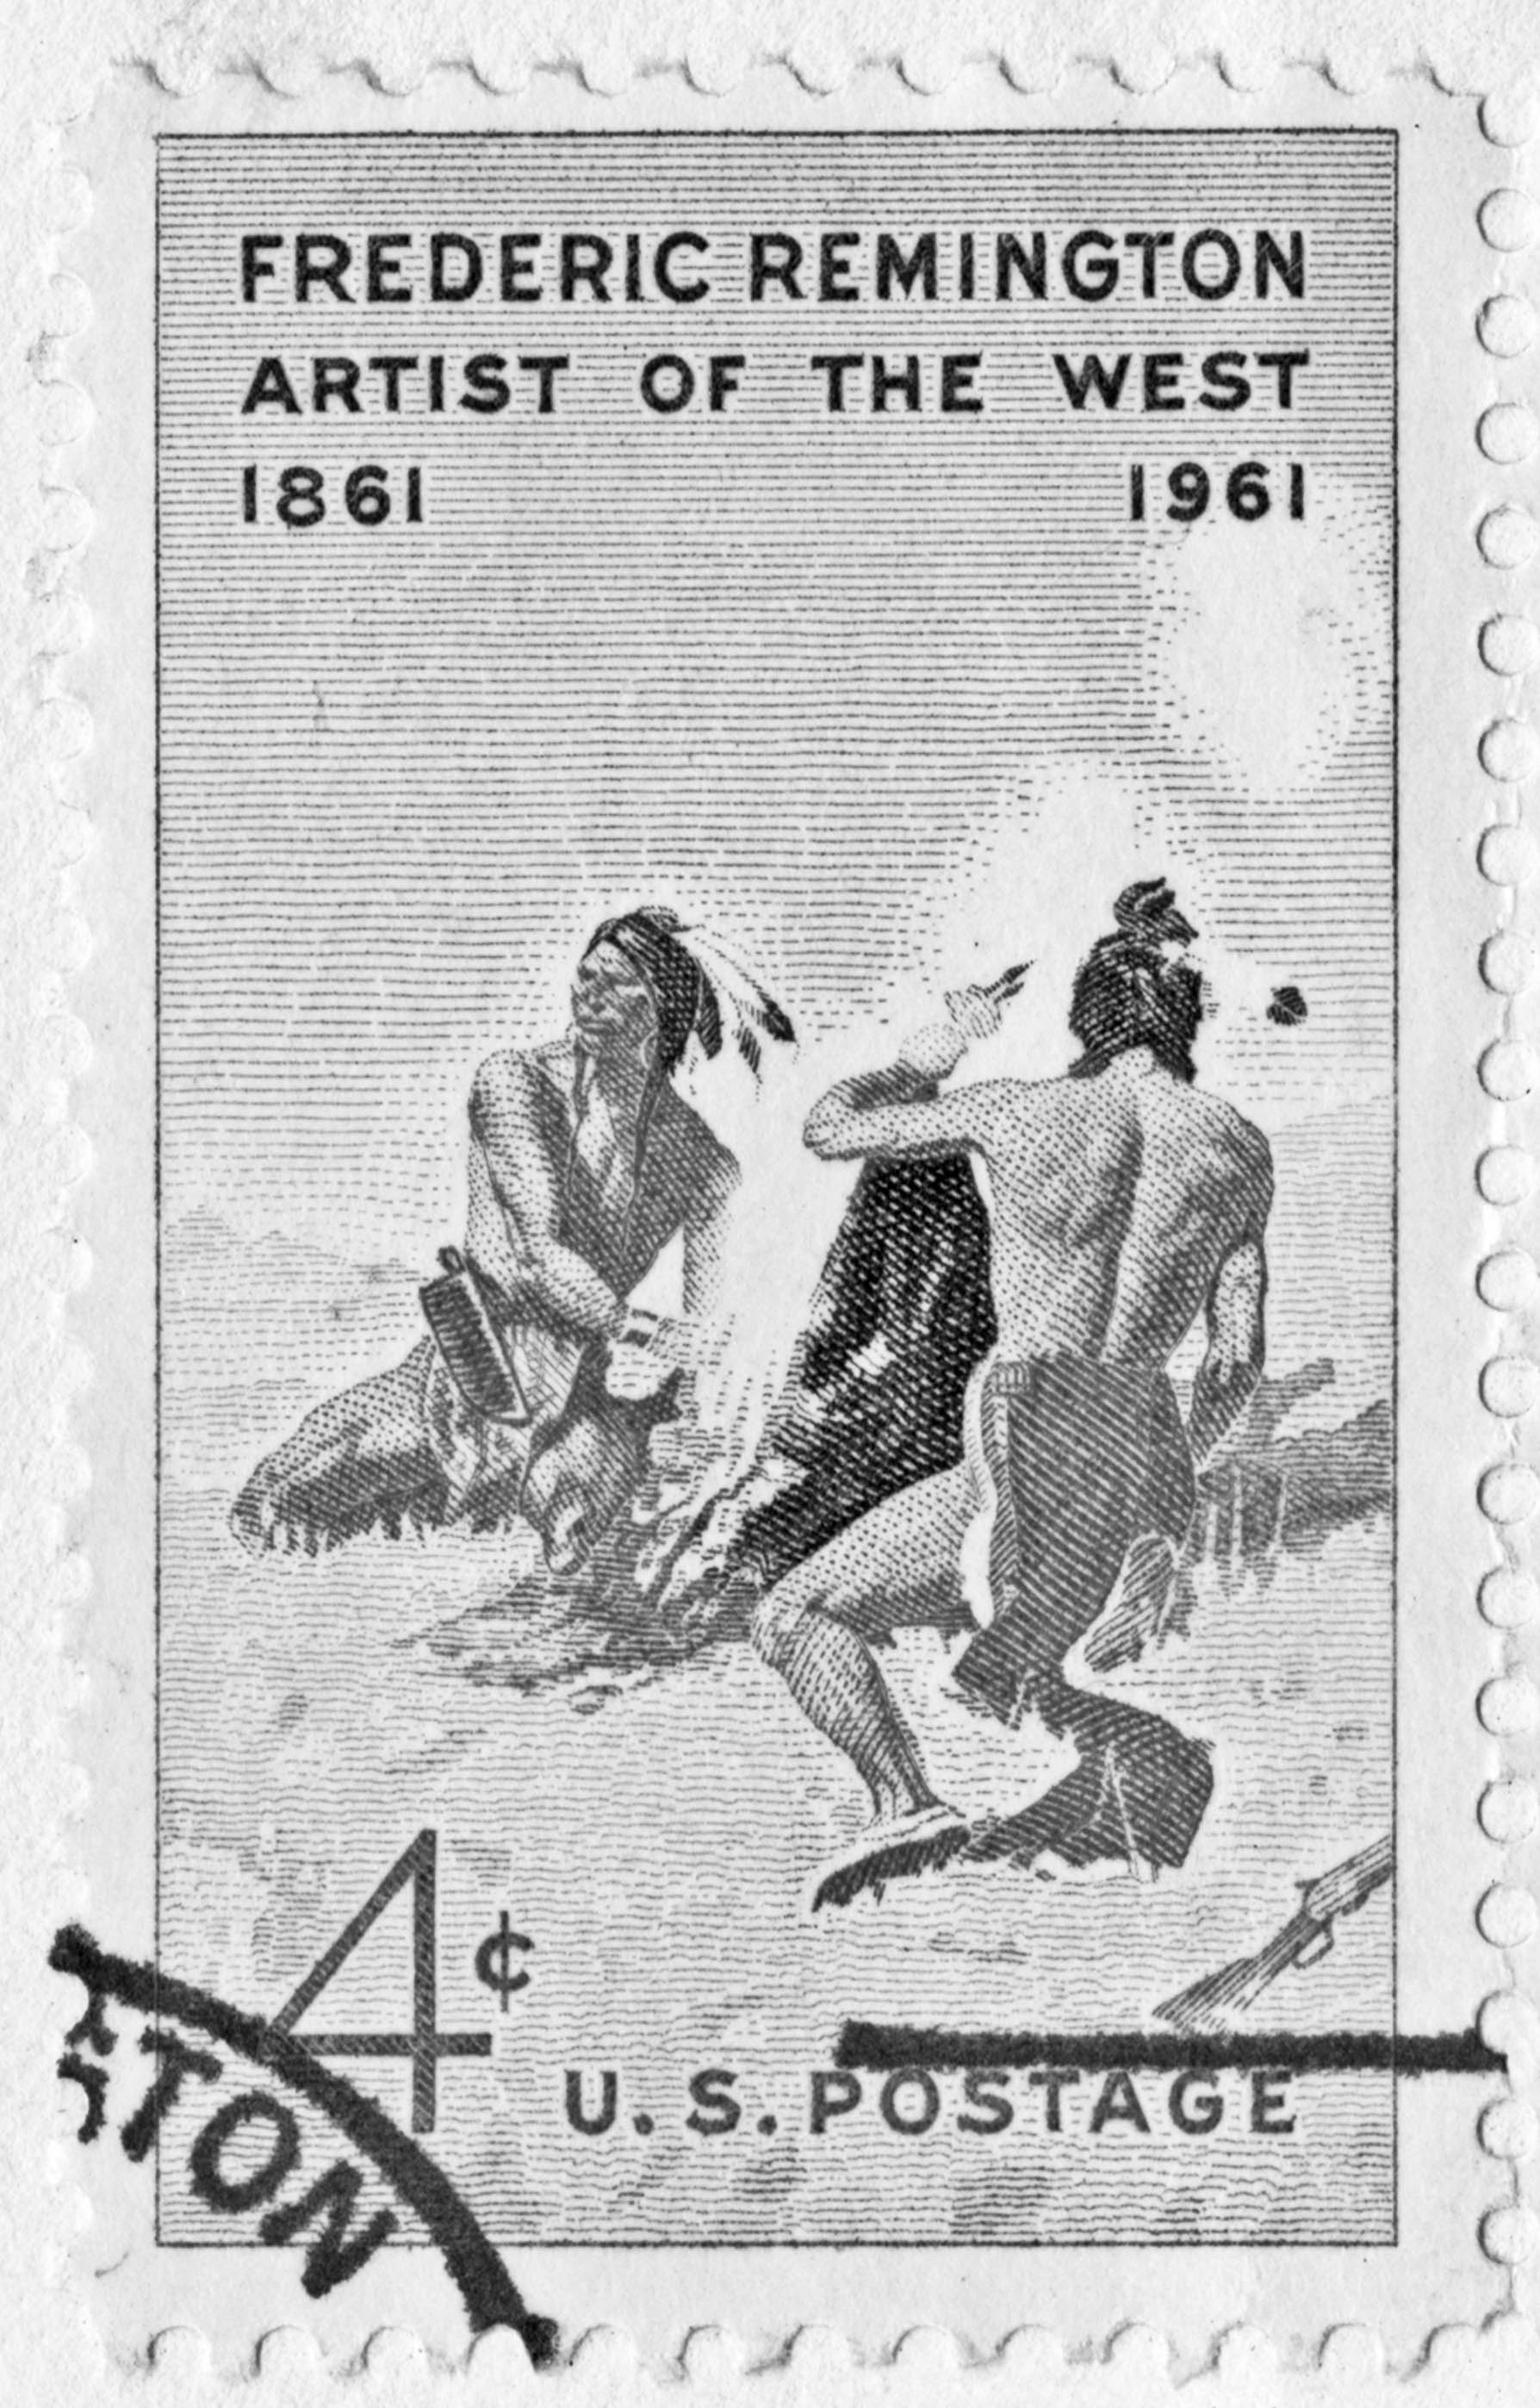 Frederic Remington, The Smoke Signal (detail), 1905, printed on a 1961 US postage stamp. Private collection.